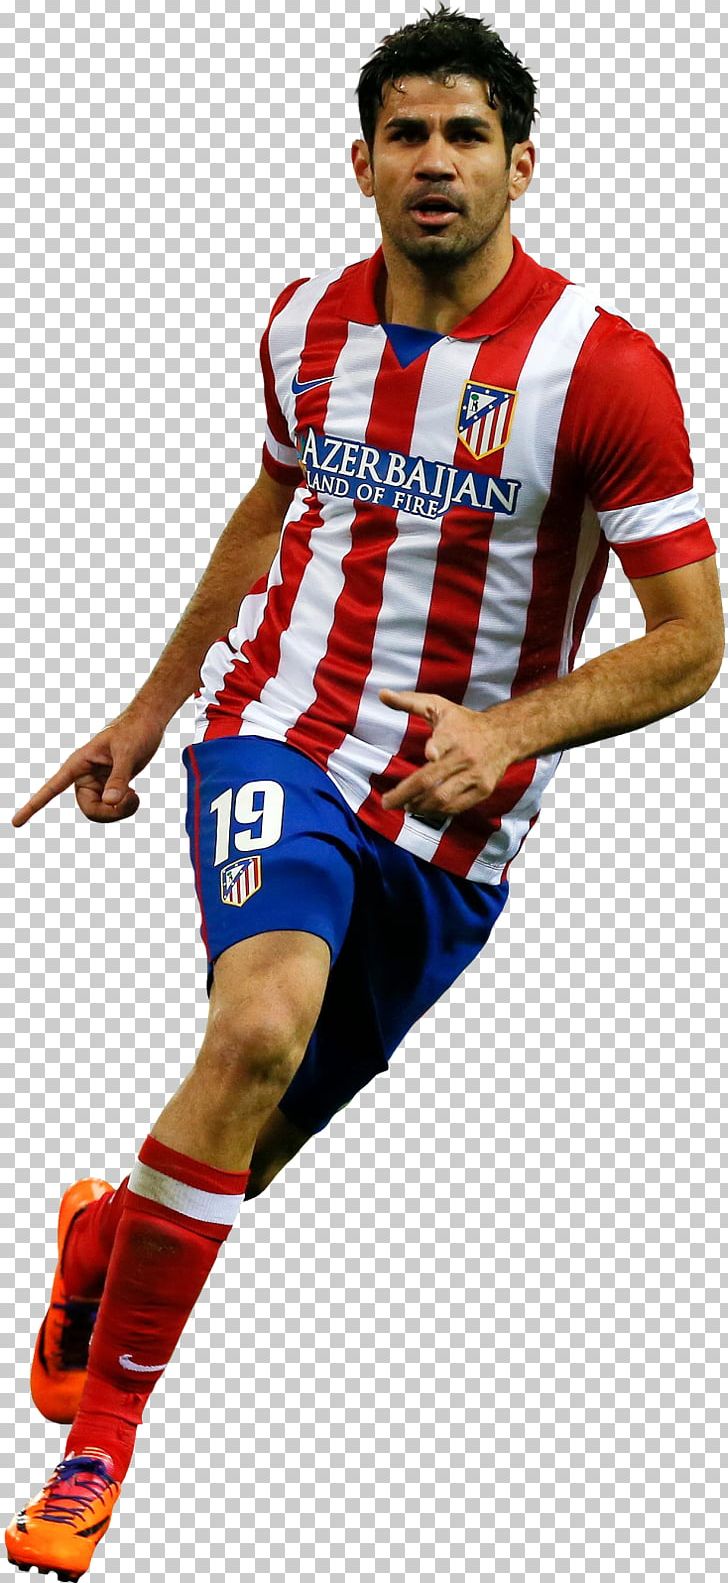 Diego Costa Atlético Madrid Real Madrid C.F. Chelsea F.C. Football Player PNG, Clipart, Atletico Madrid, Atletico Madrid, Chelsea F.c., Chelsea Fc, Diego Costa Free PNG Download